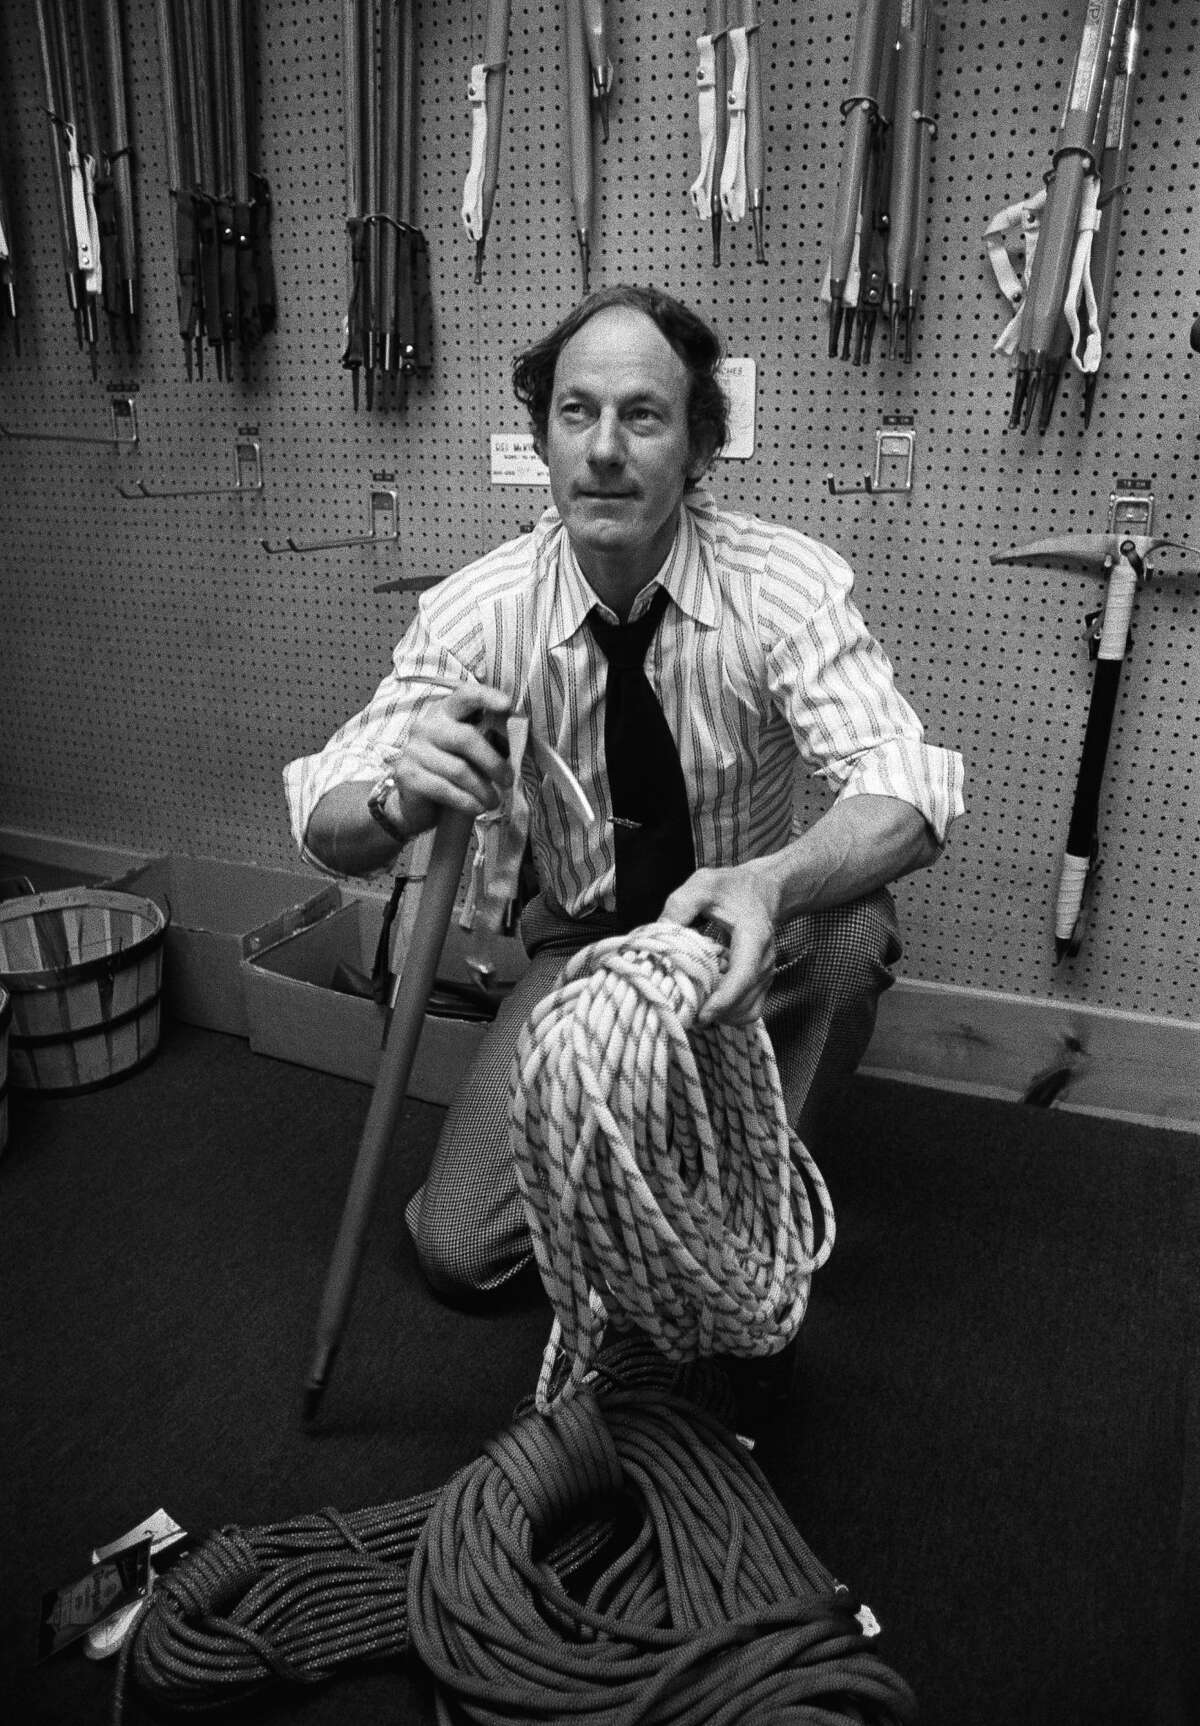 Jim Whittaker, shown here April 12, 1975 in Seattle, shows off some of the gear he will be taking when he leads a nine-member American expedition to climb K2, a 28,741 feet high mountain on the China-Pakistan border. Big Jim was first American atop Mt. Everest, and early CEO of Recreational Equipment, Inc. A second expedition, in 1978, reached summit of K2.